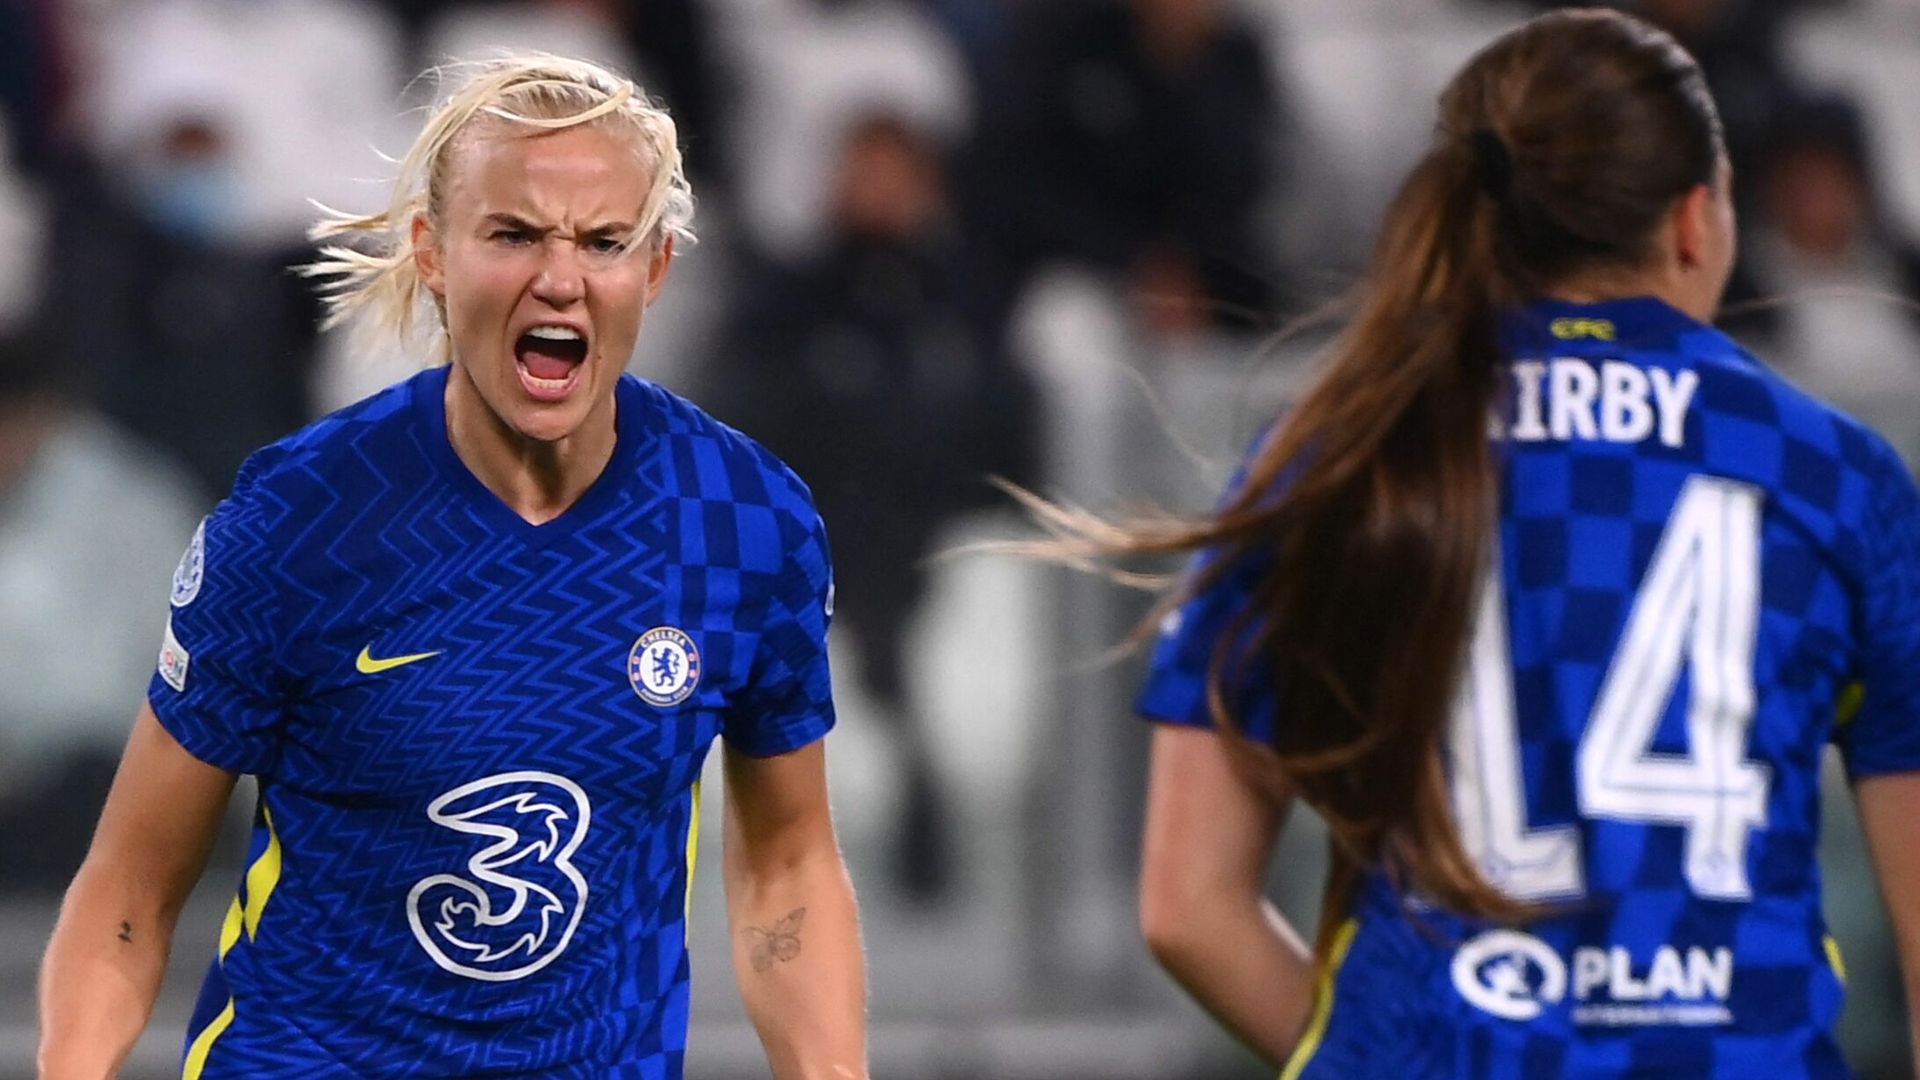 Harder scores again as Chelsea clinch first Women's CL win